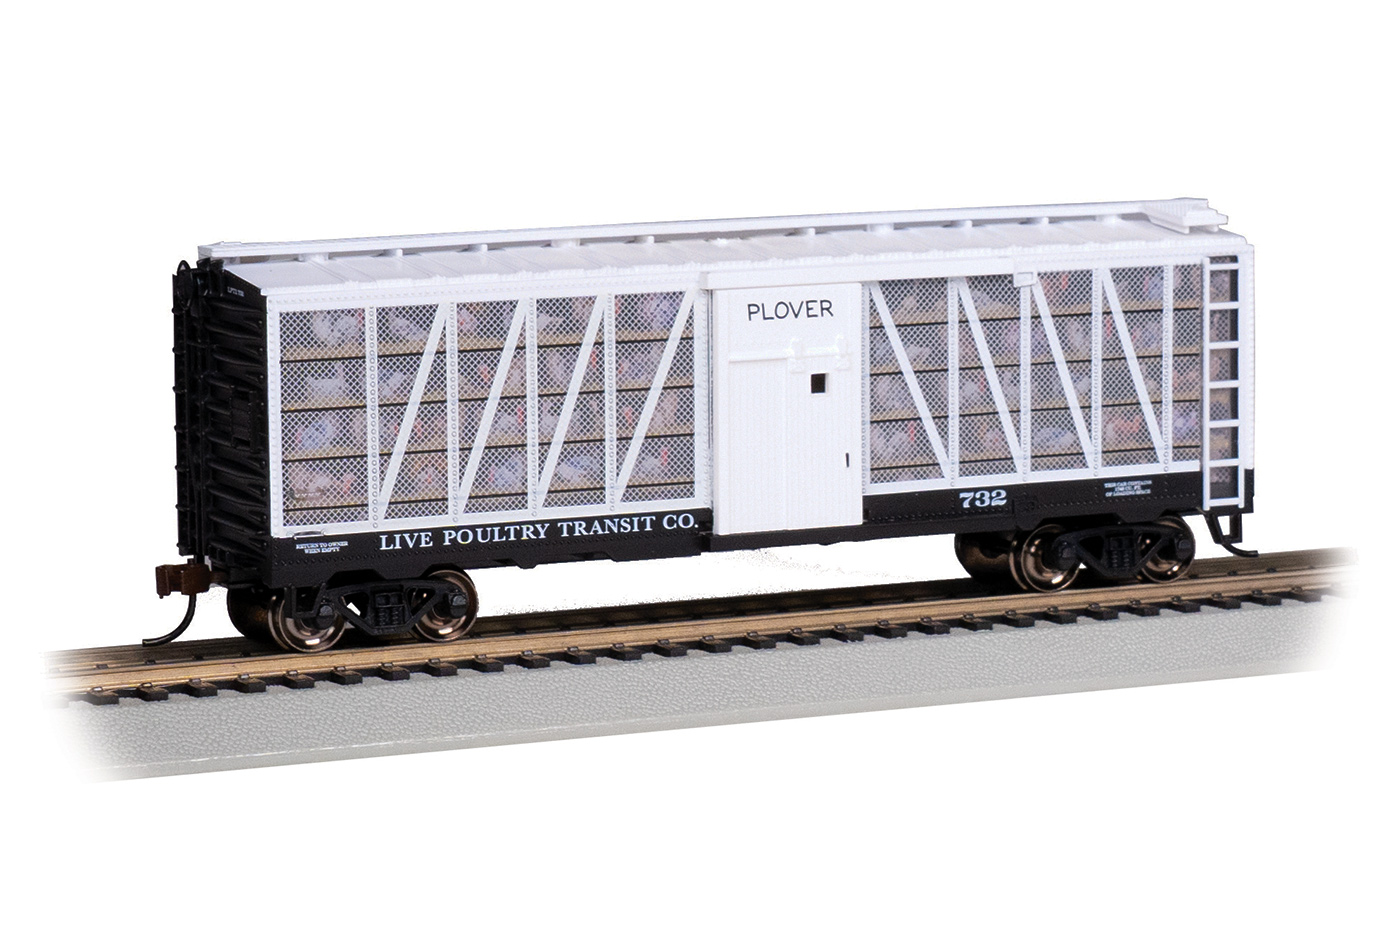 Live Poultry Transit Co. #732 (Plover With Turkeys) (HO Scale)